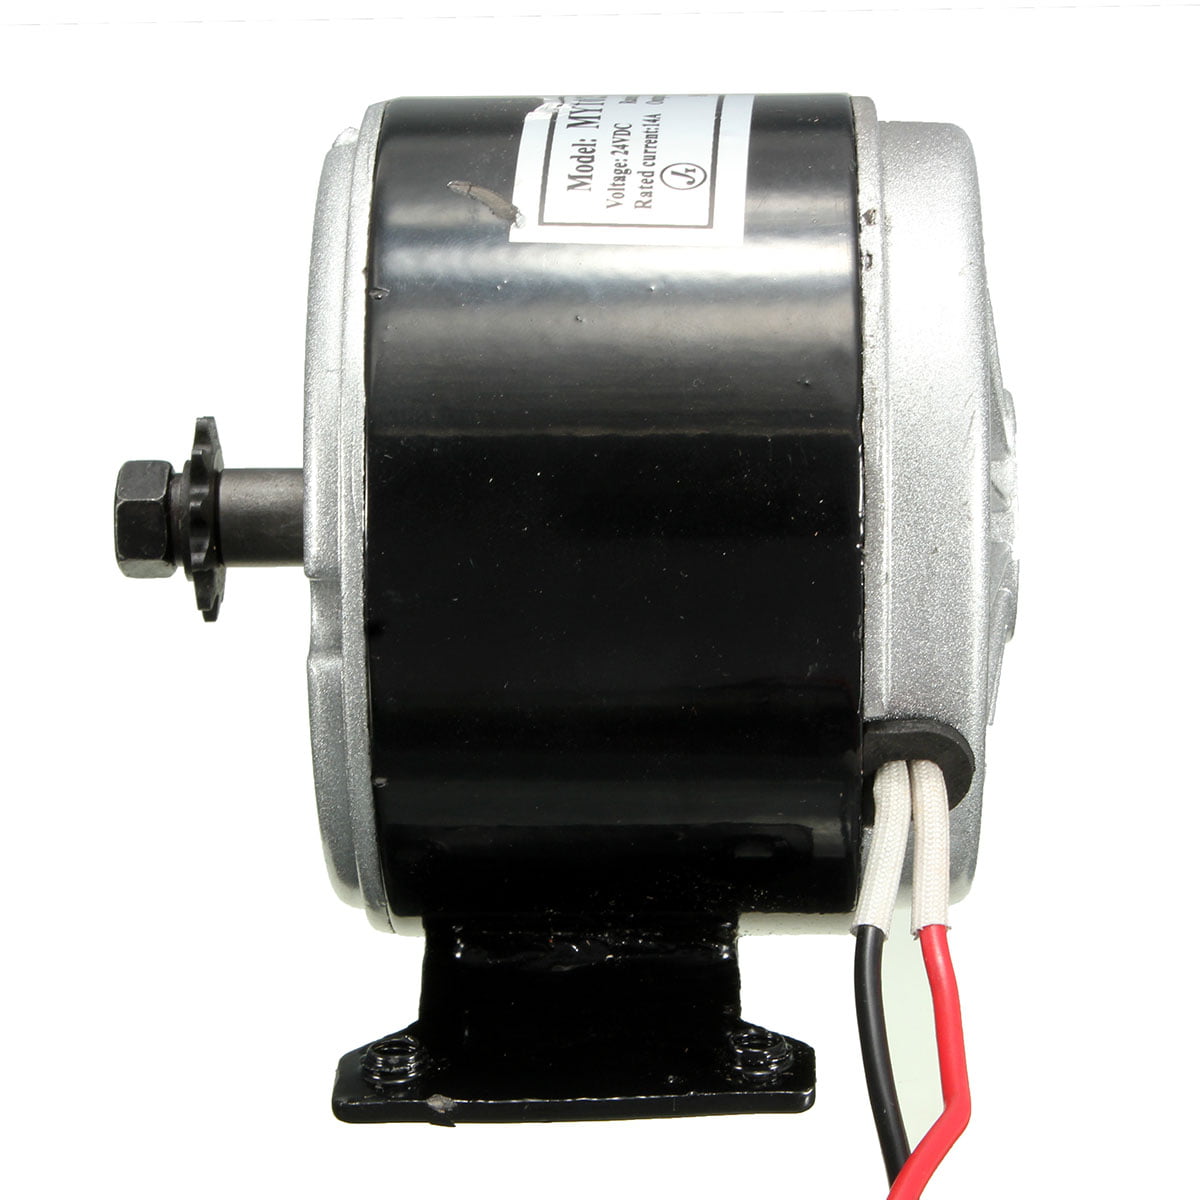 24V DC Motor Brushed 250W 2750RPM For DIY Electric Scooter E Bike Bicycle MY1025 